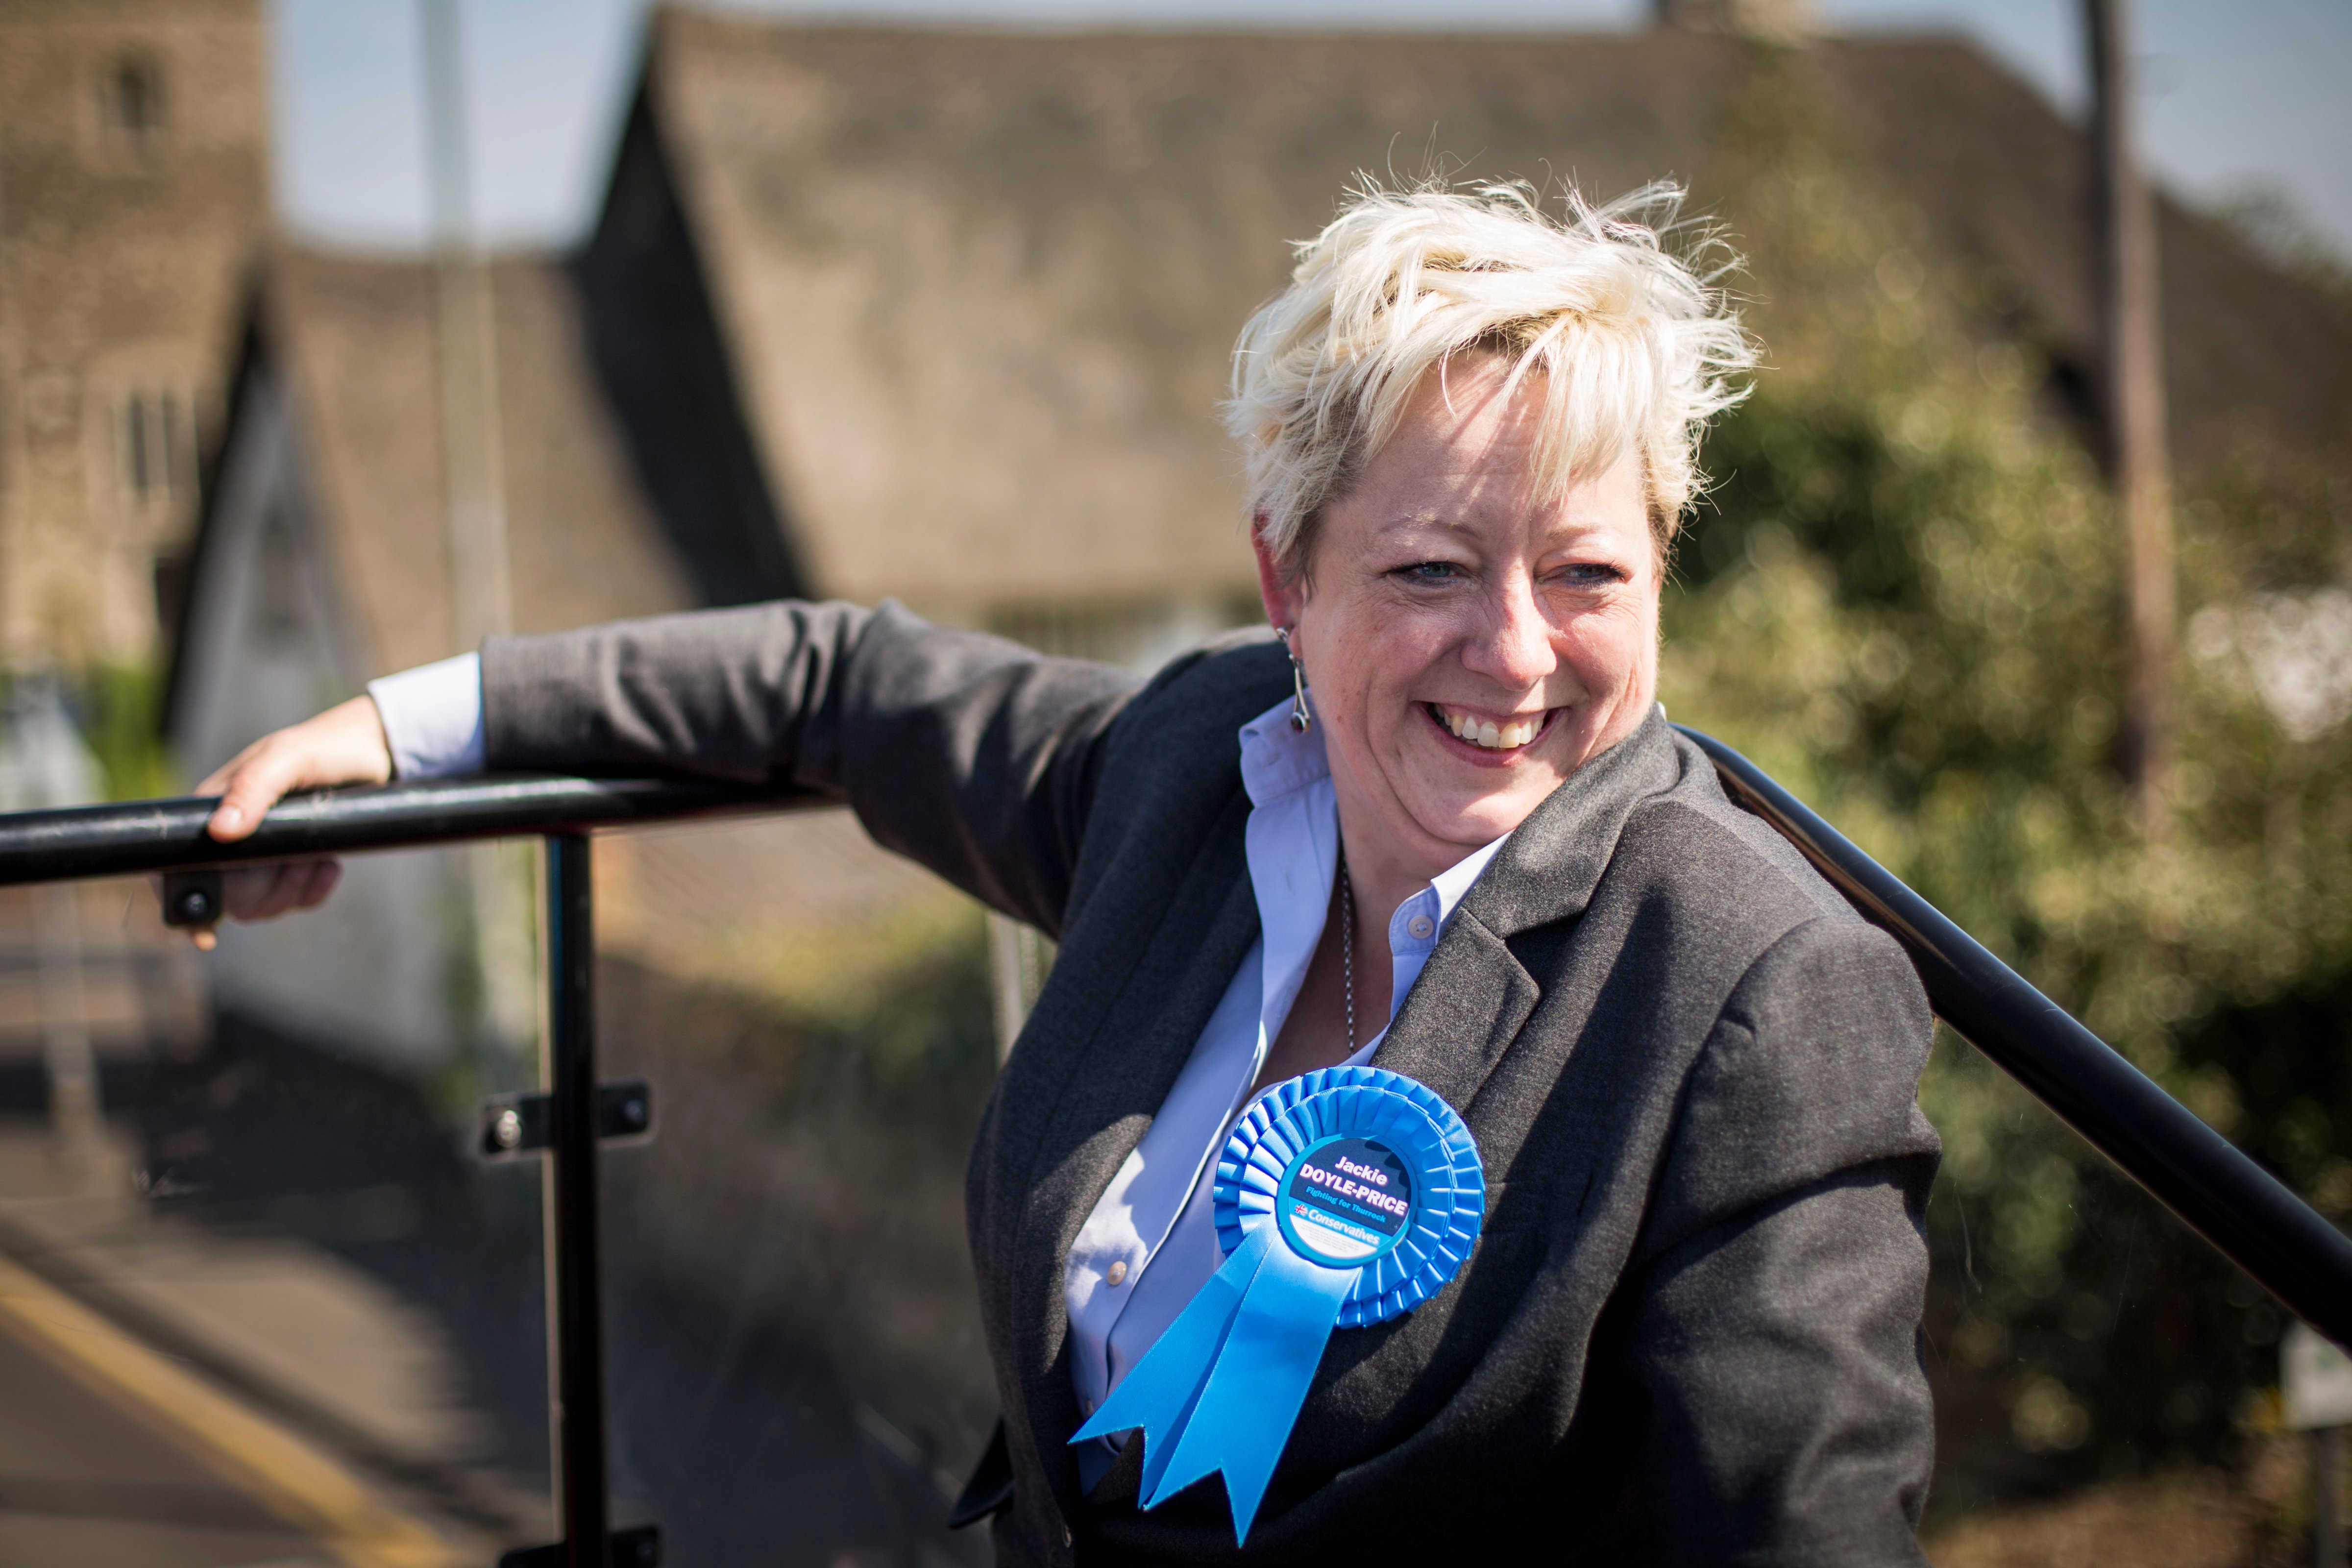 Jackie Doyle-Price, incumbent Conservative Member of Parliament (MP) for Thurrock, travels around her constituency in Thurrock, England on April 21, 2015. (Rob Stothard—Getty Images)